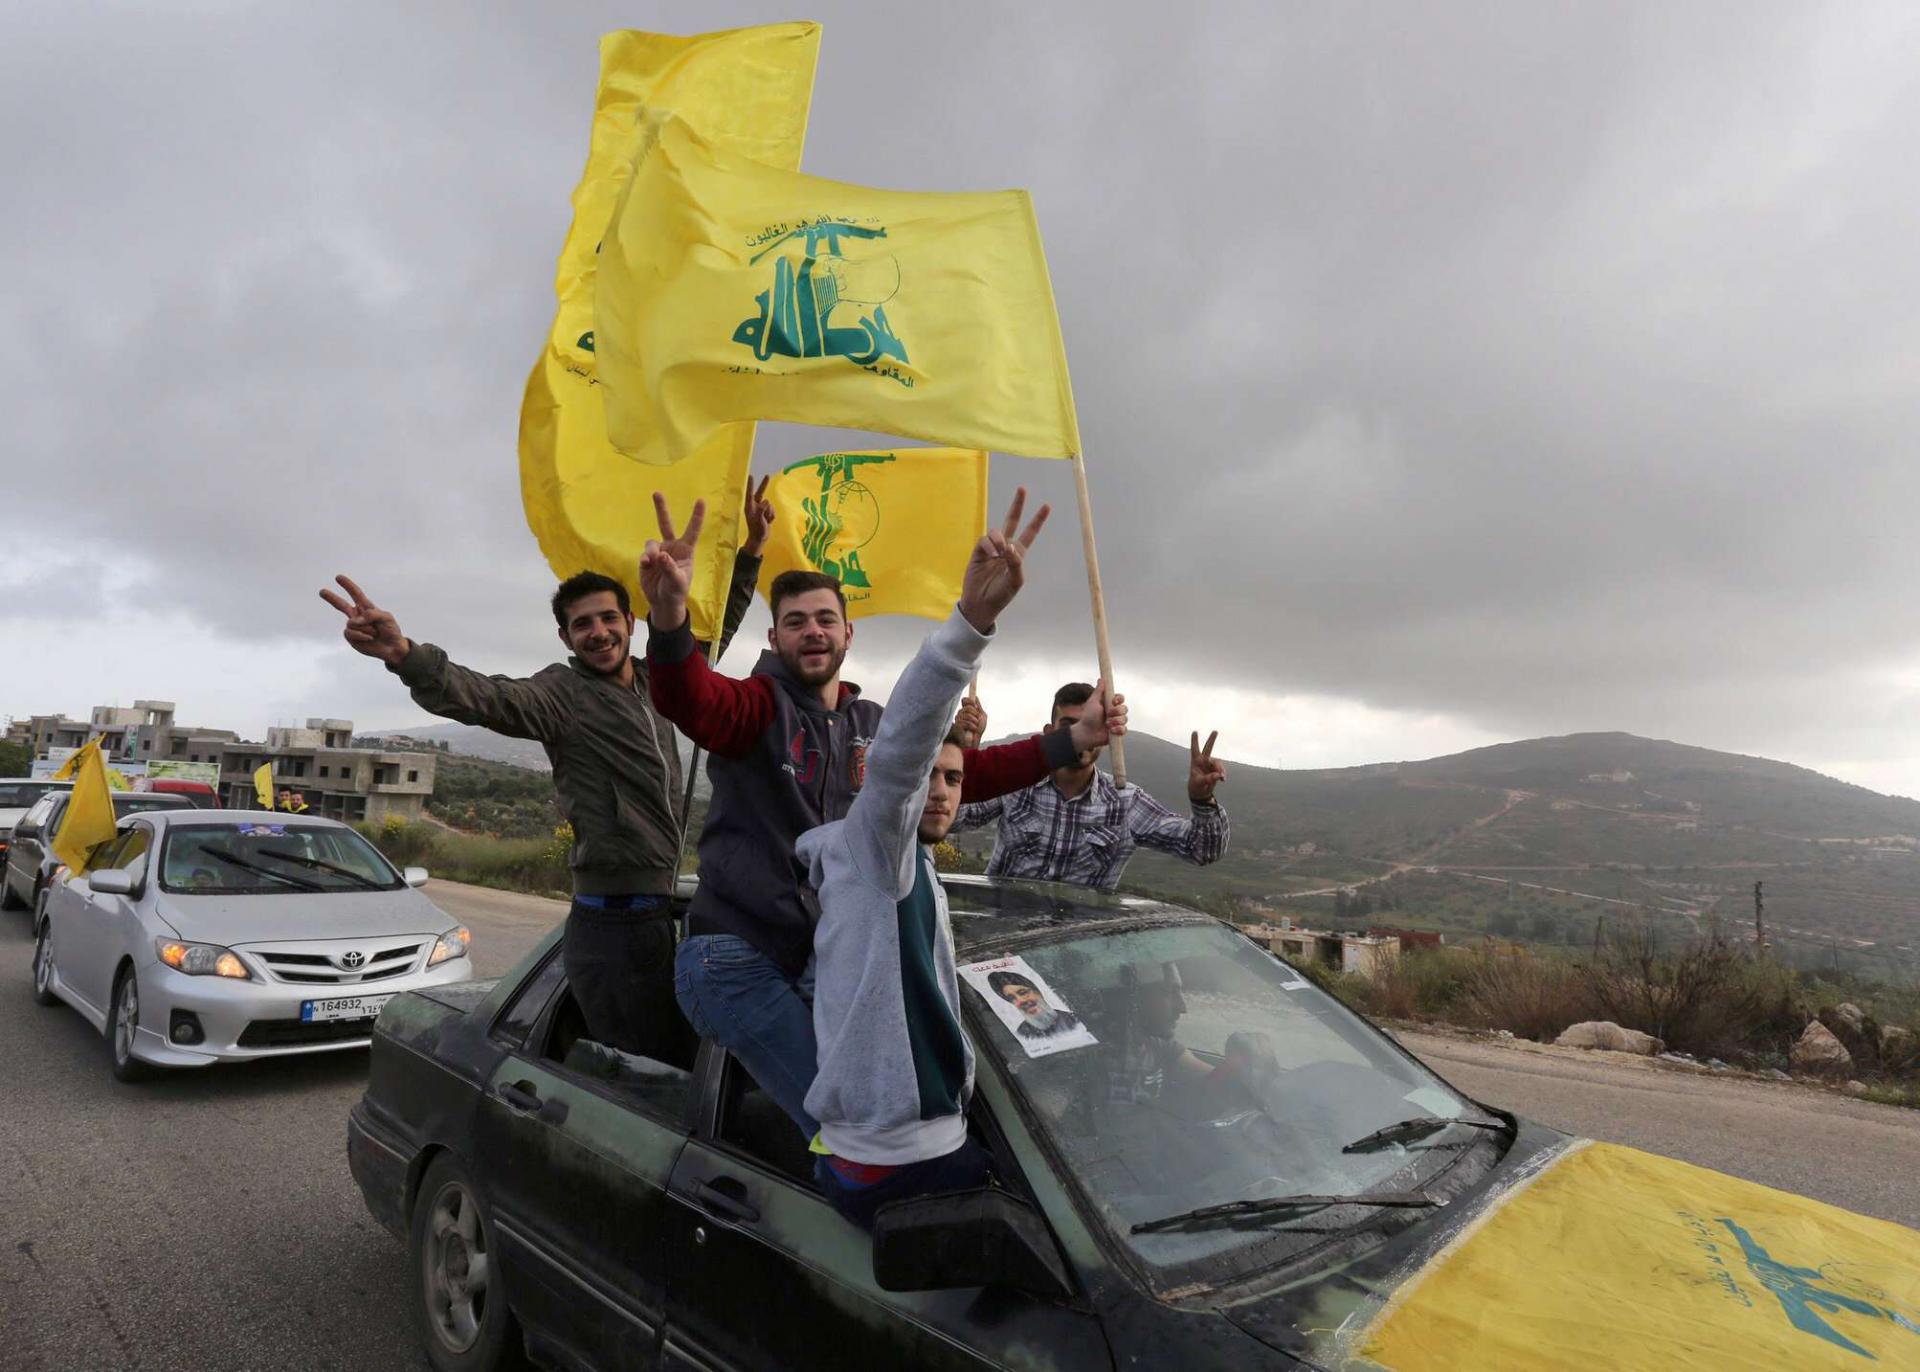 Supporters of Lebanon's Hezbollah leader Sayyed Hassan Nasrallah gesture as they hold Hezbollah flags in Marjayoun, Lebanon May 7, 2018.